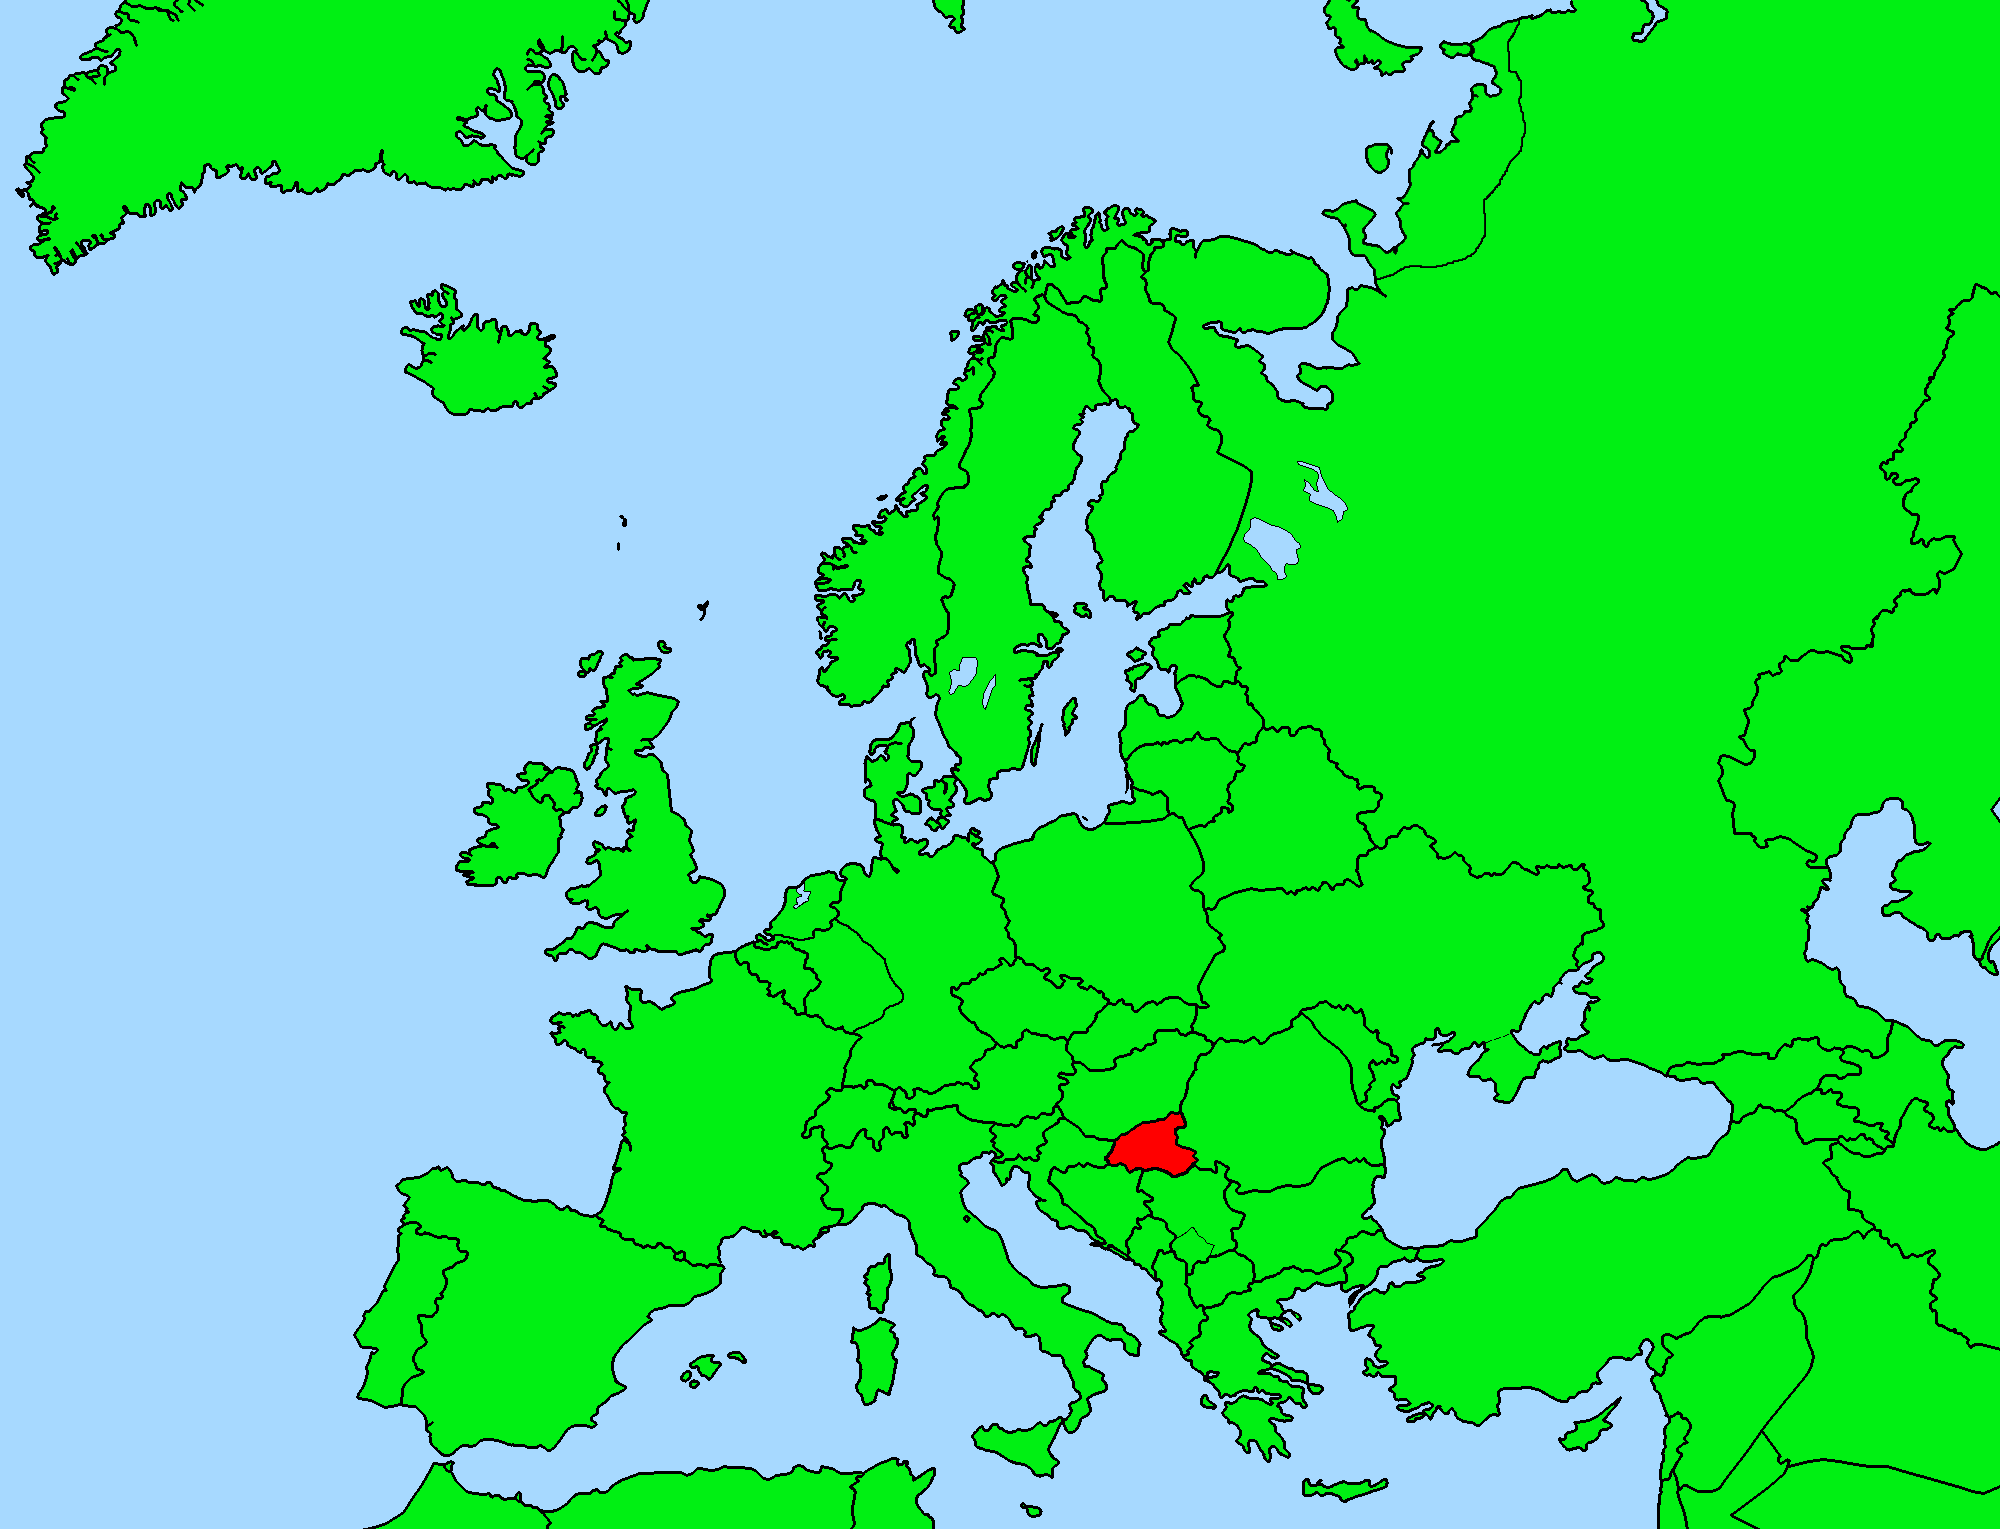 a) Location of the Vojvodina Province (Serbia) in Europe and (b)